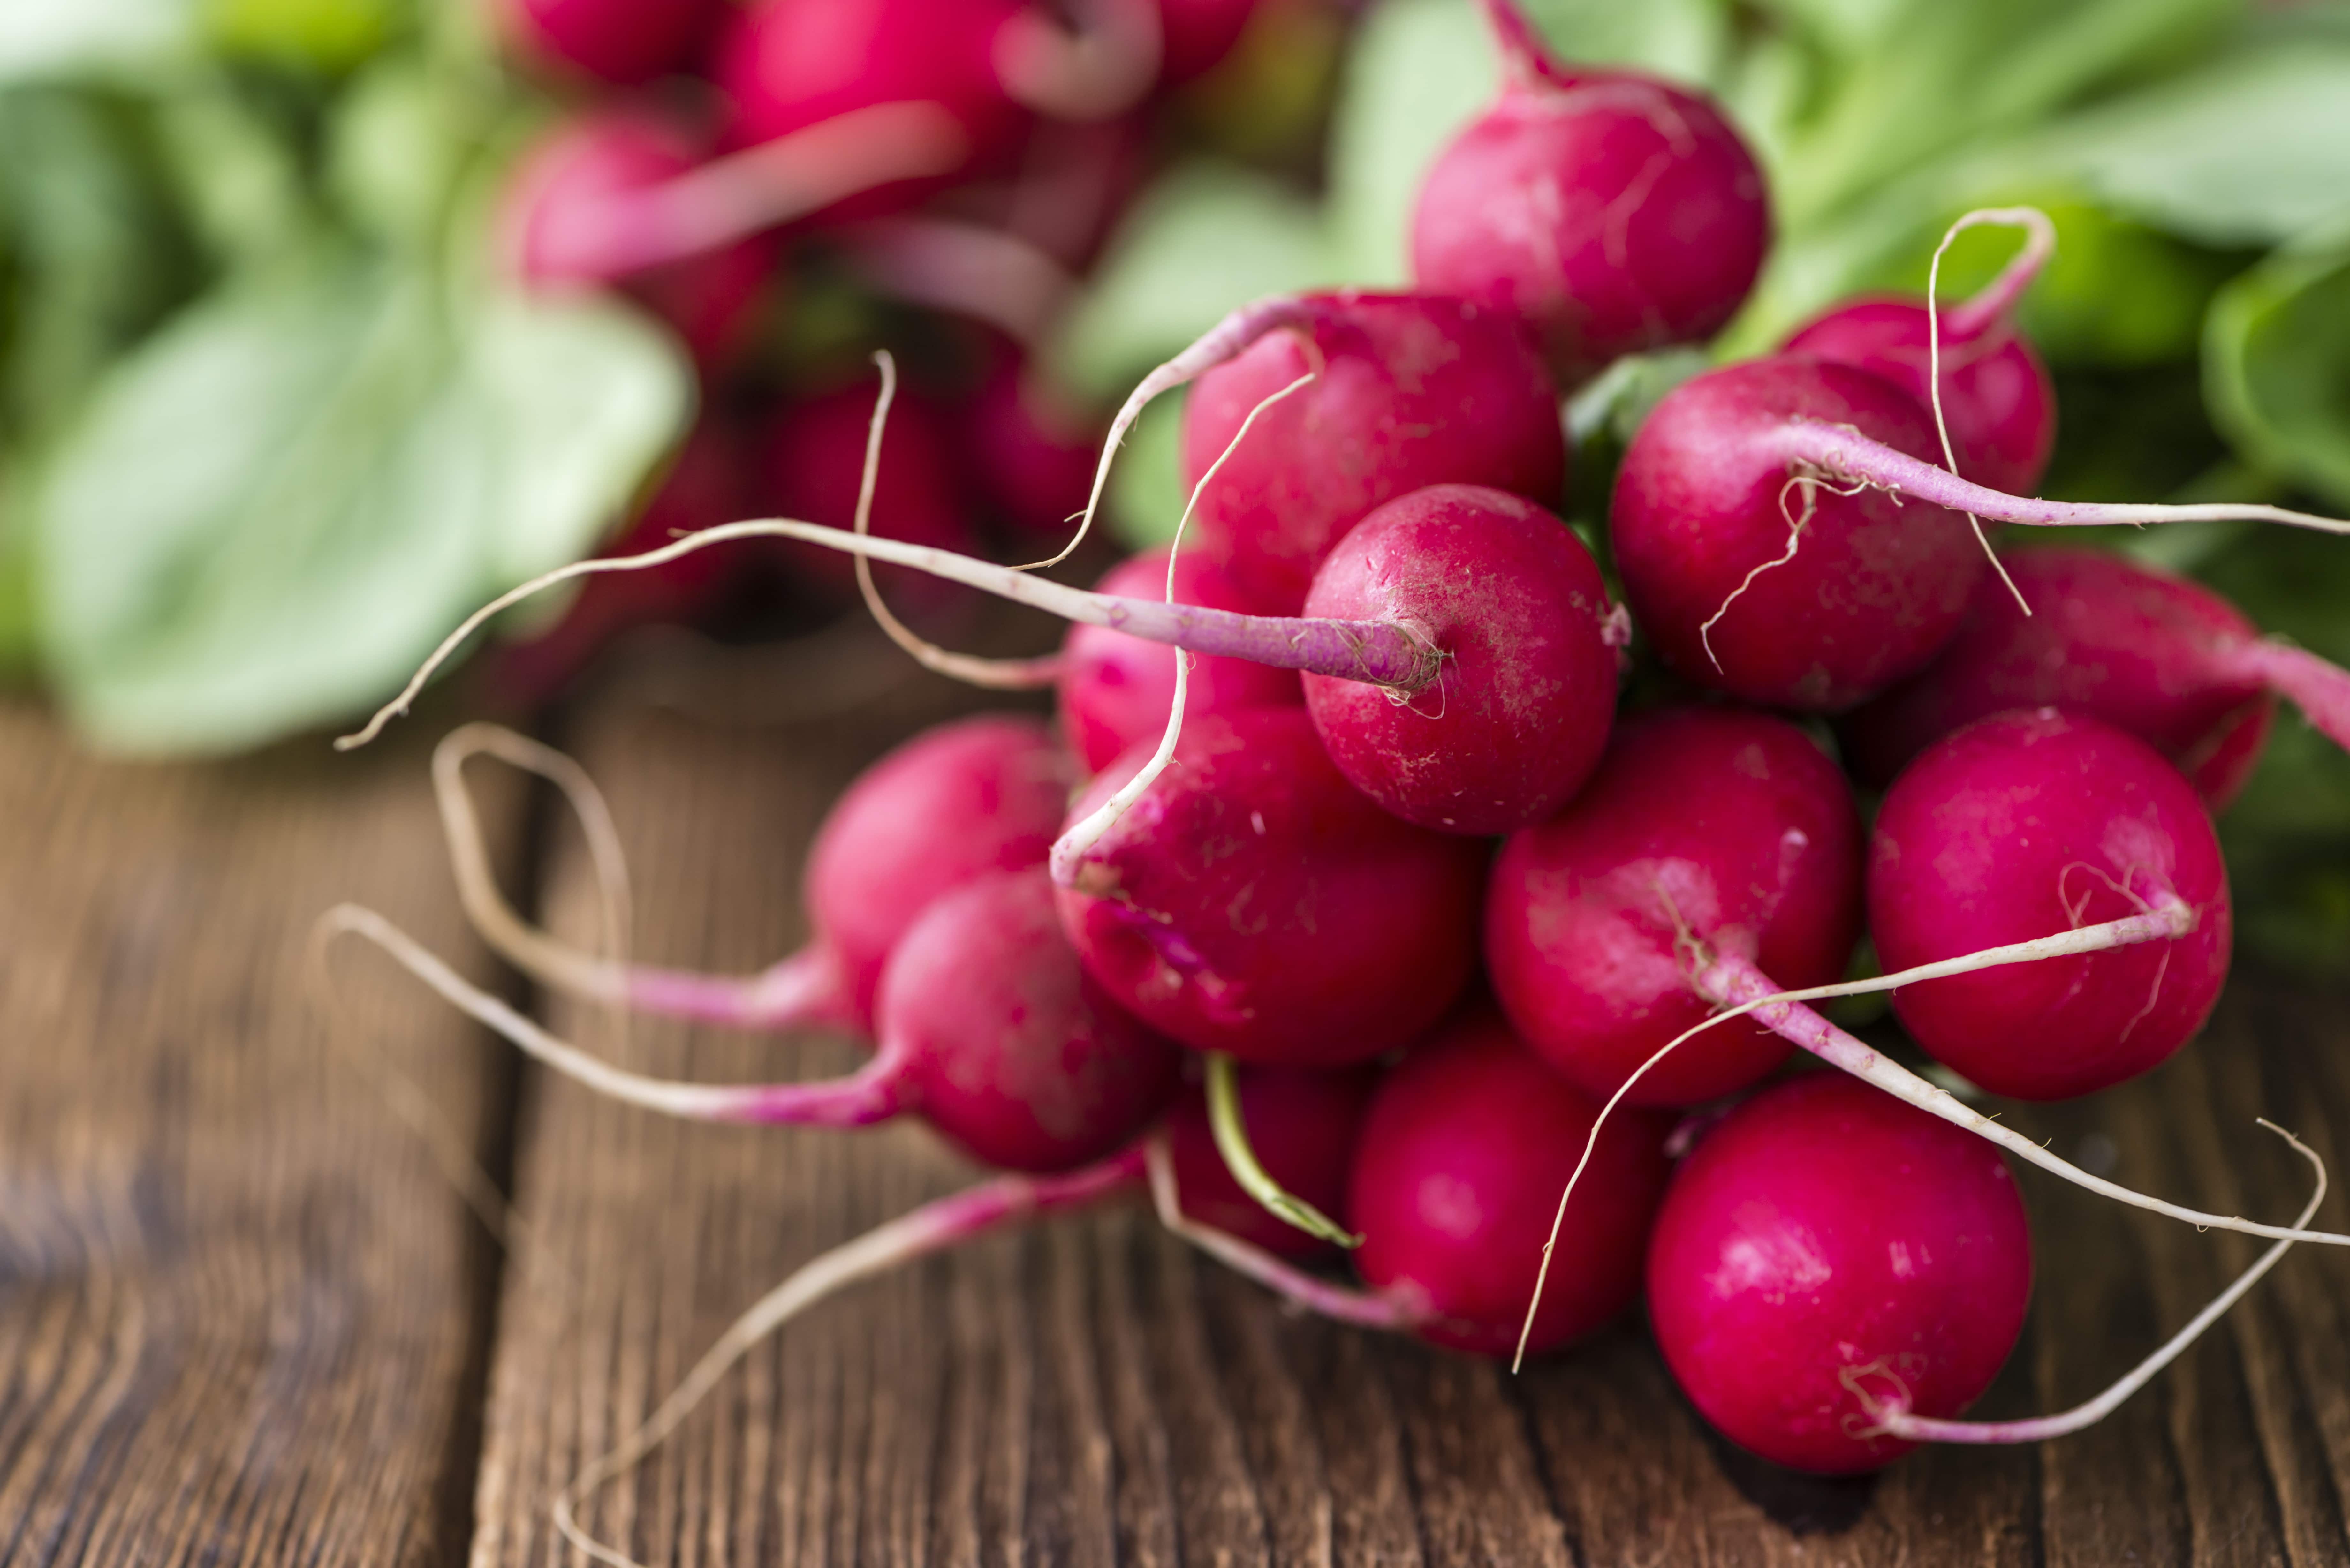 Portion of Radishes (selective focus, close-up shot) on wooden background